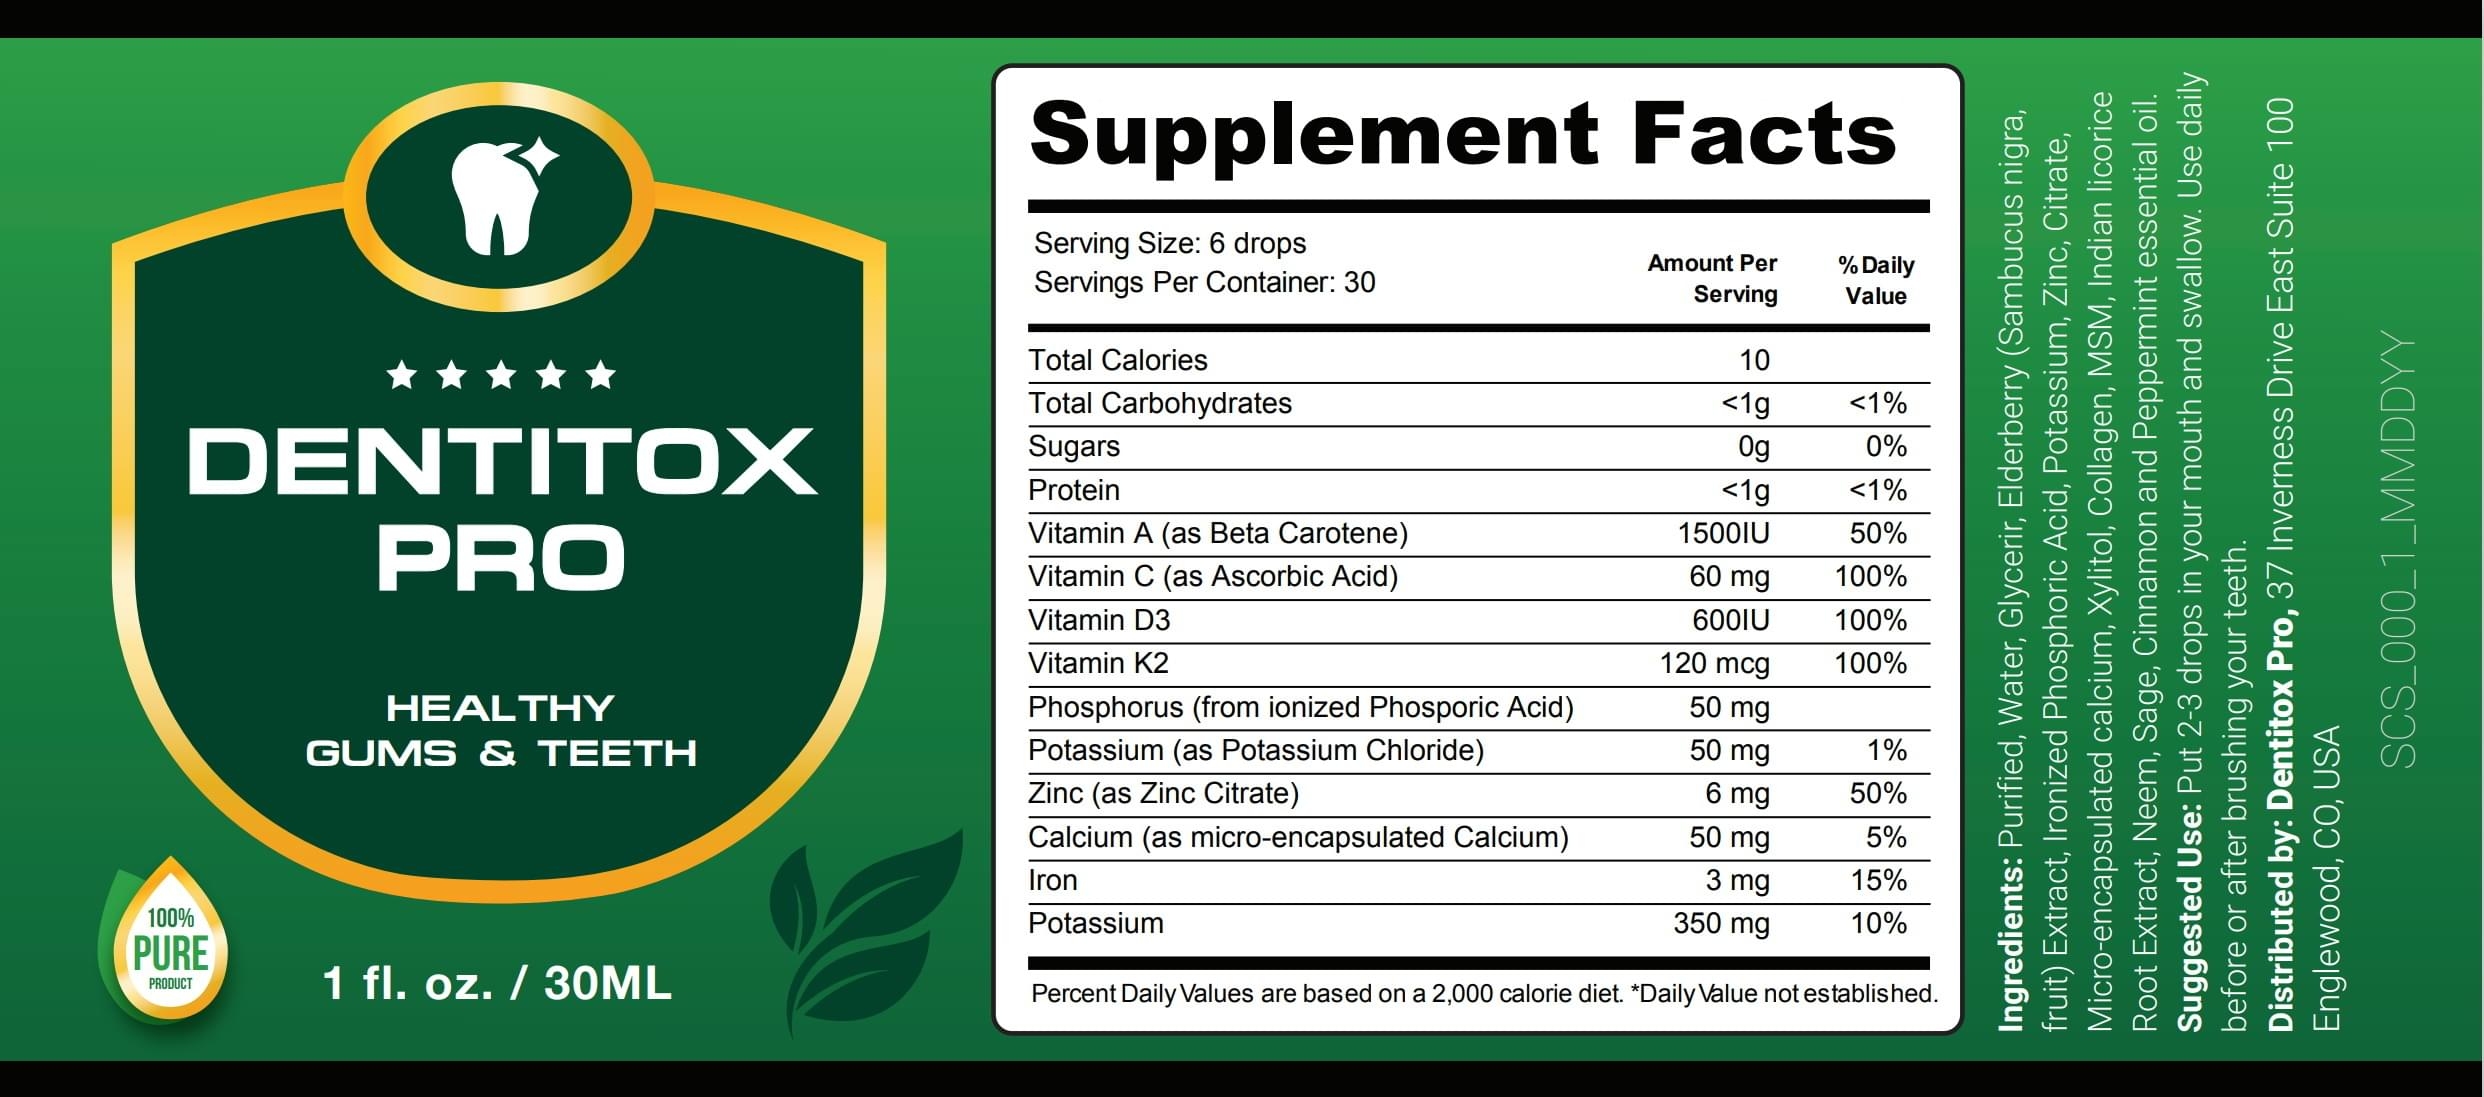 DentitoxPro Supplement Facts